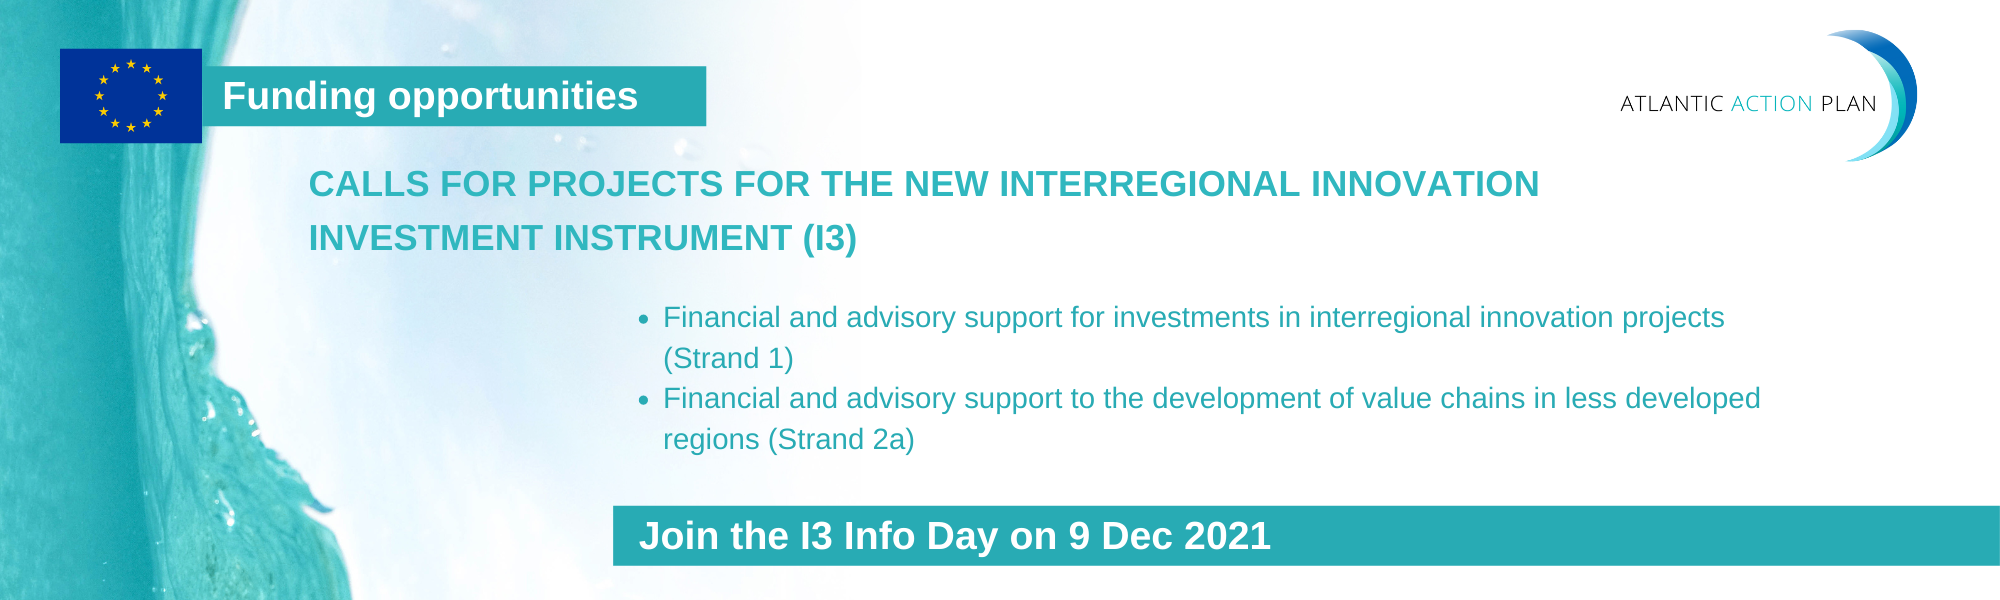 Calls for projects for the new Interregional Innovation Investment instrument (I3)